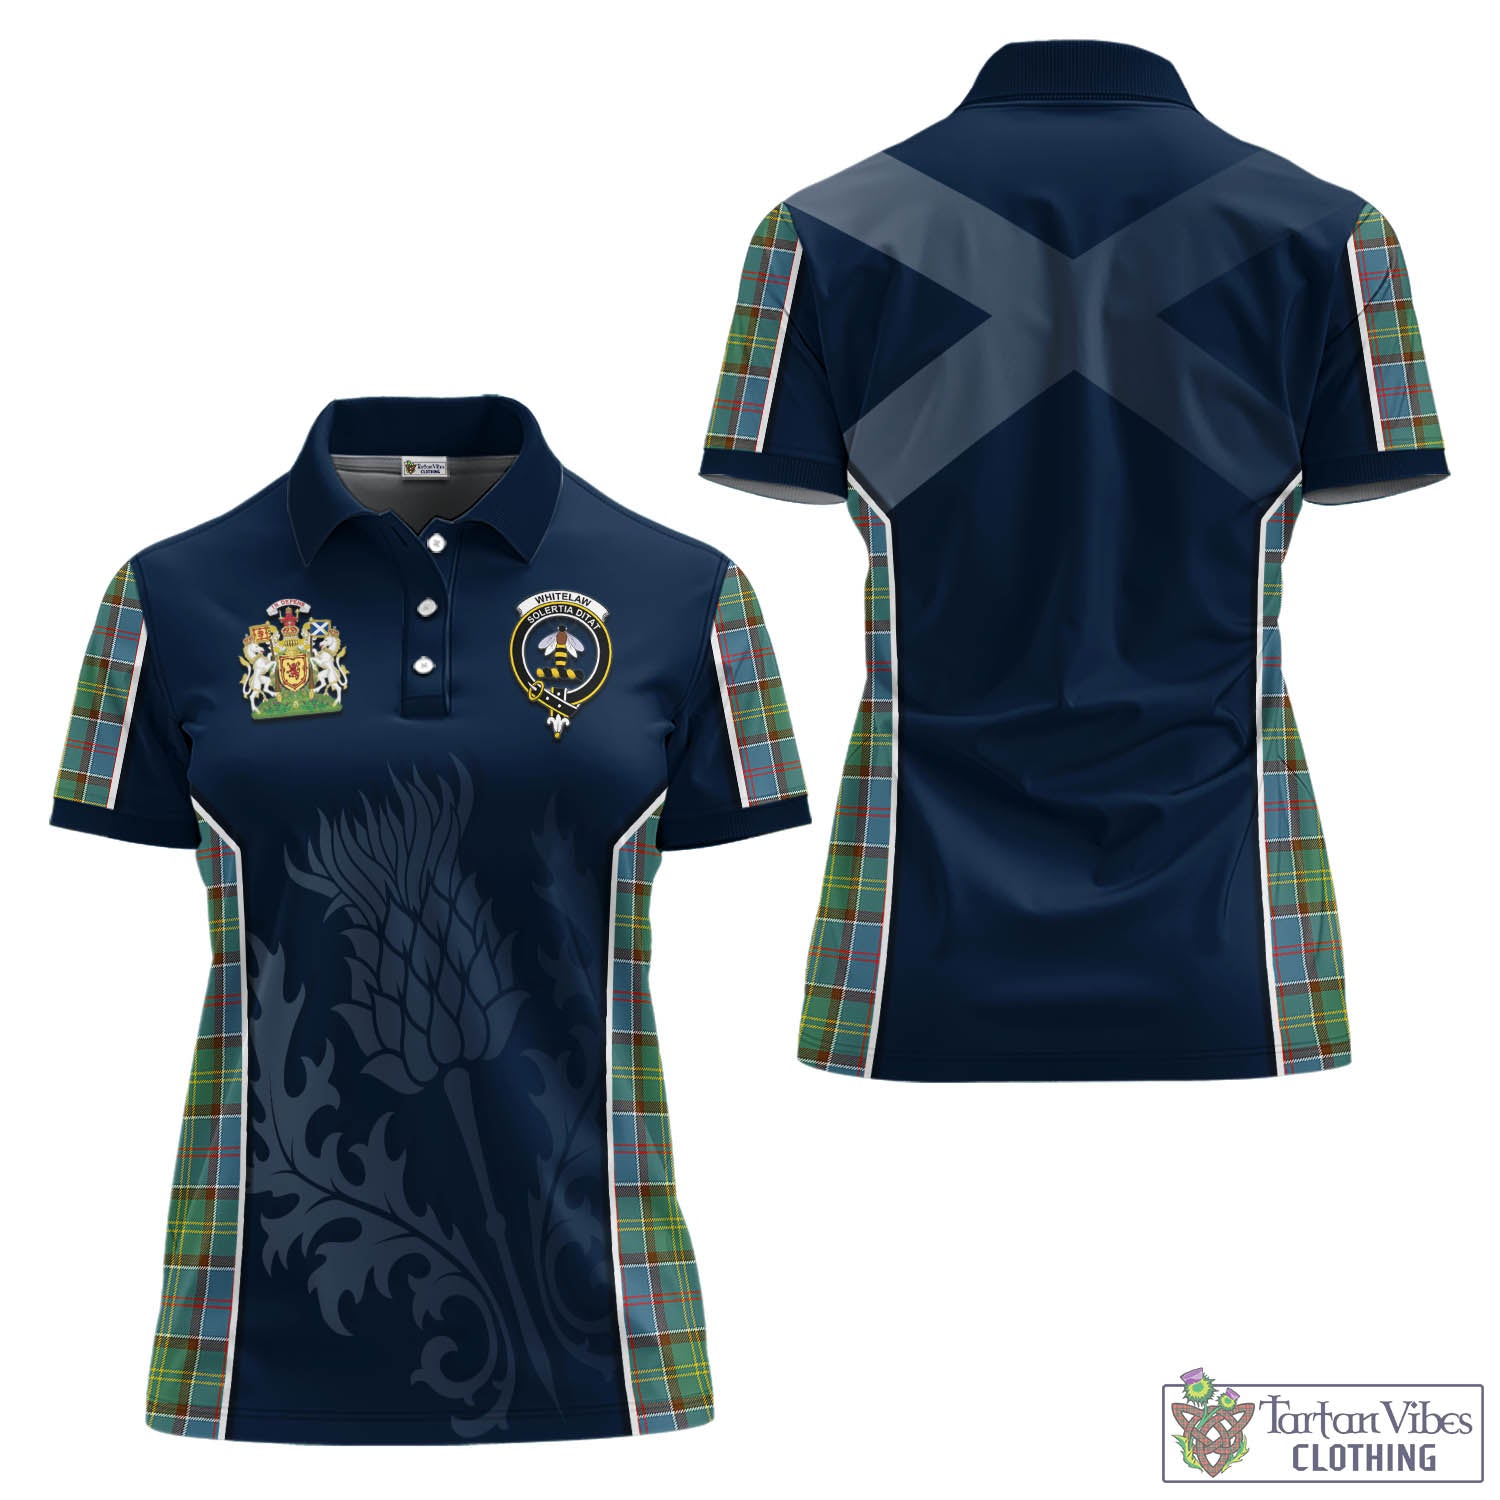 Tartan Vibes Clothing Whitelaw Tartan Women's Polo Shirt with Family Crest and Scottish Thistle Vibes Sport Style